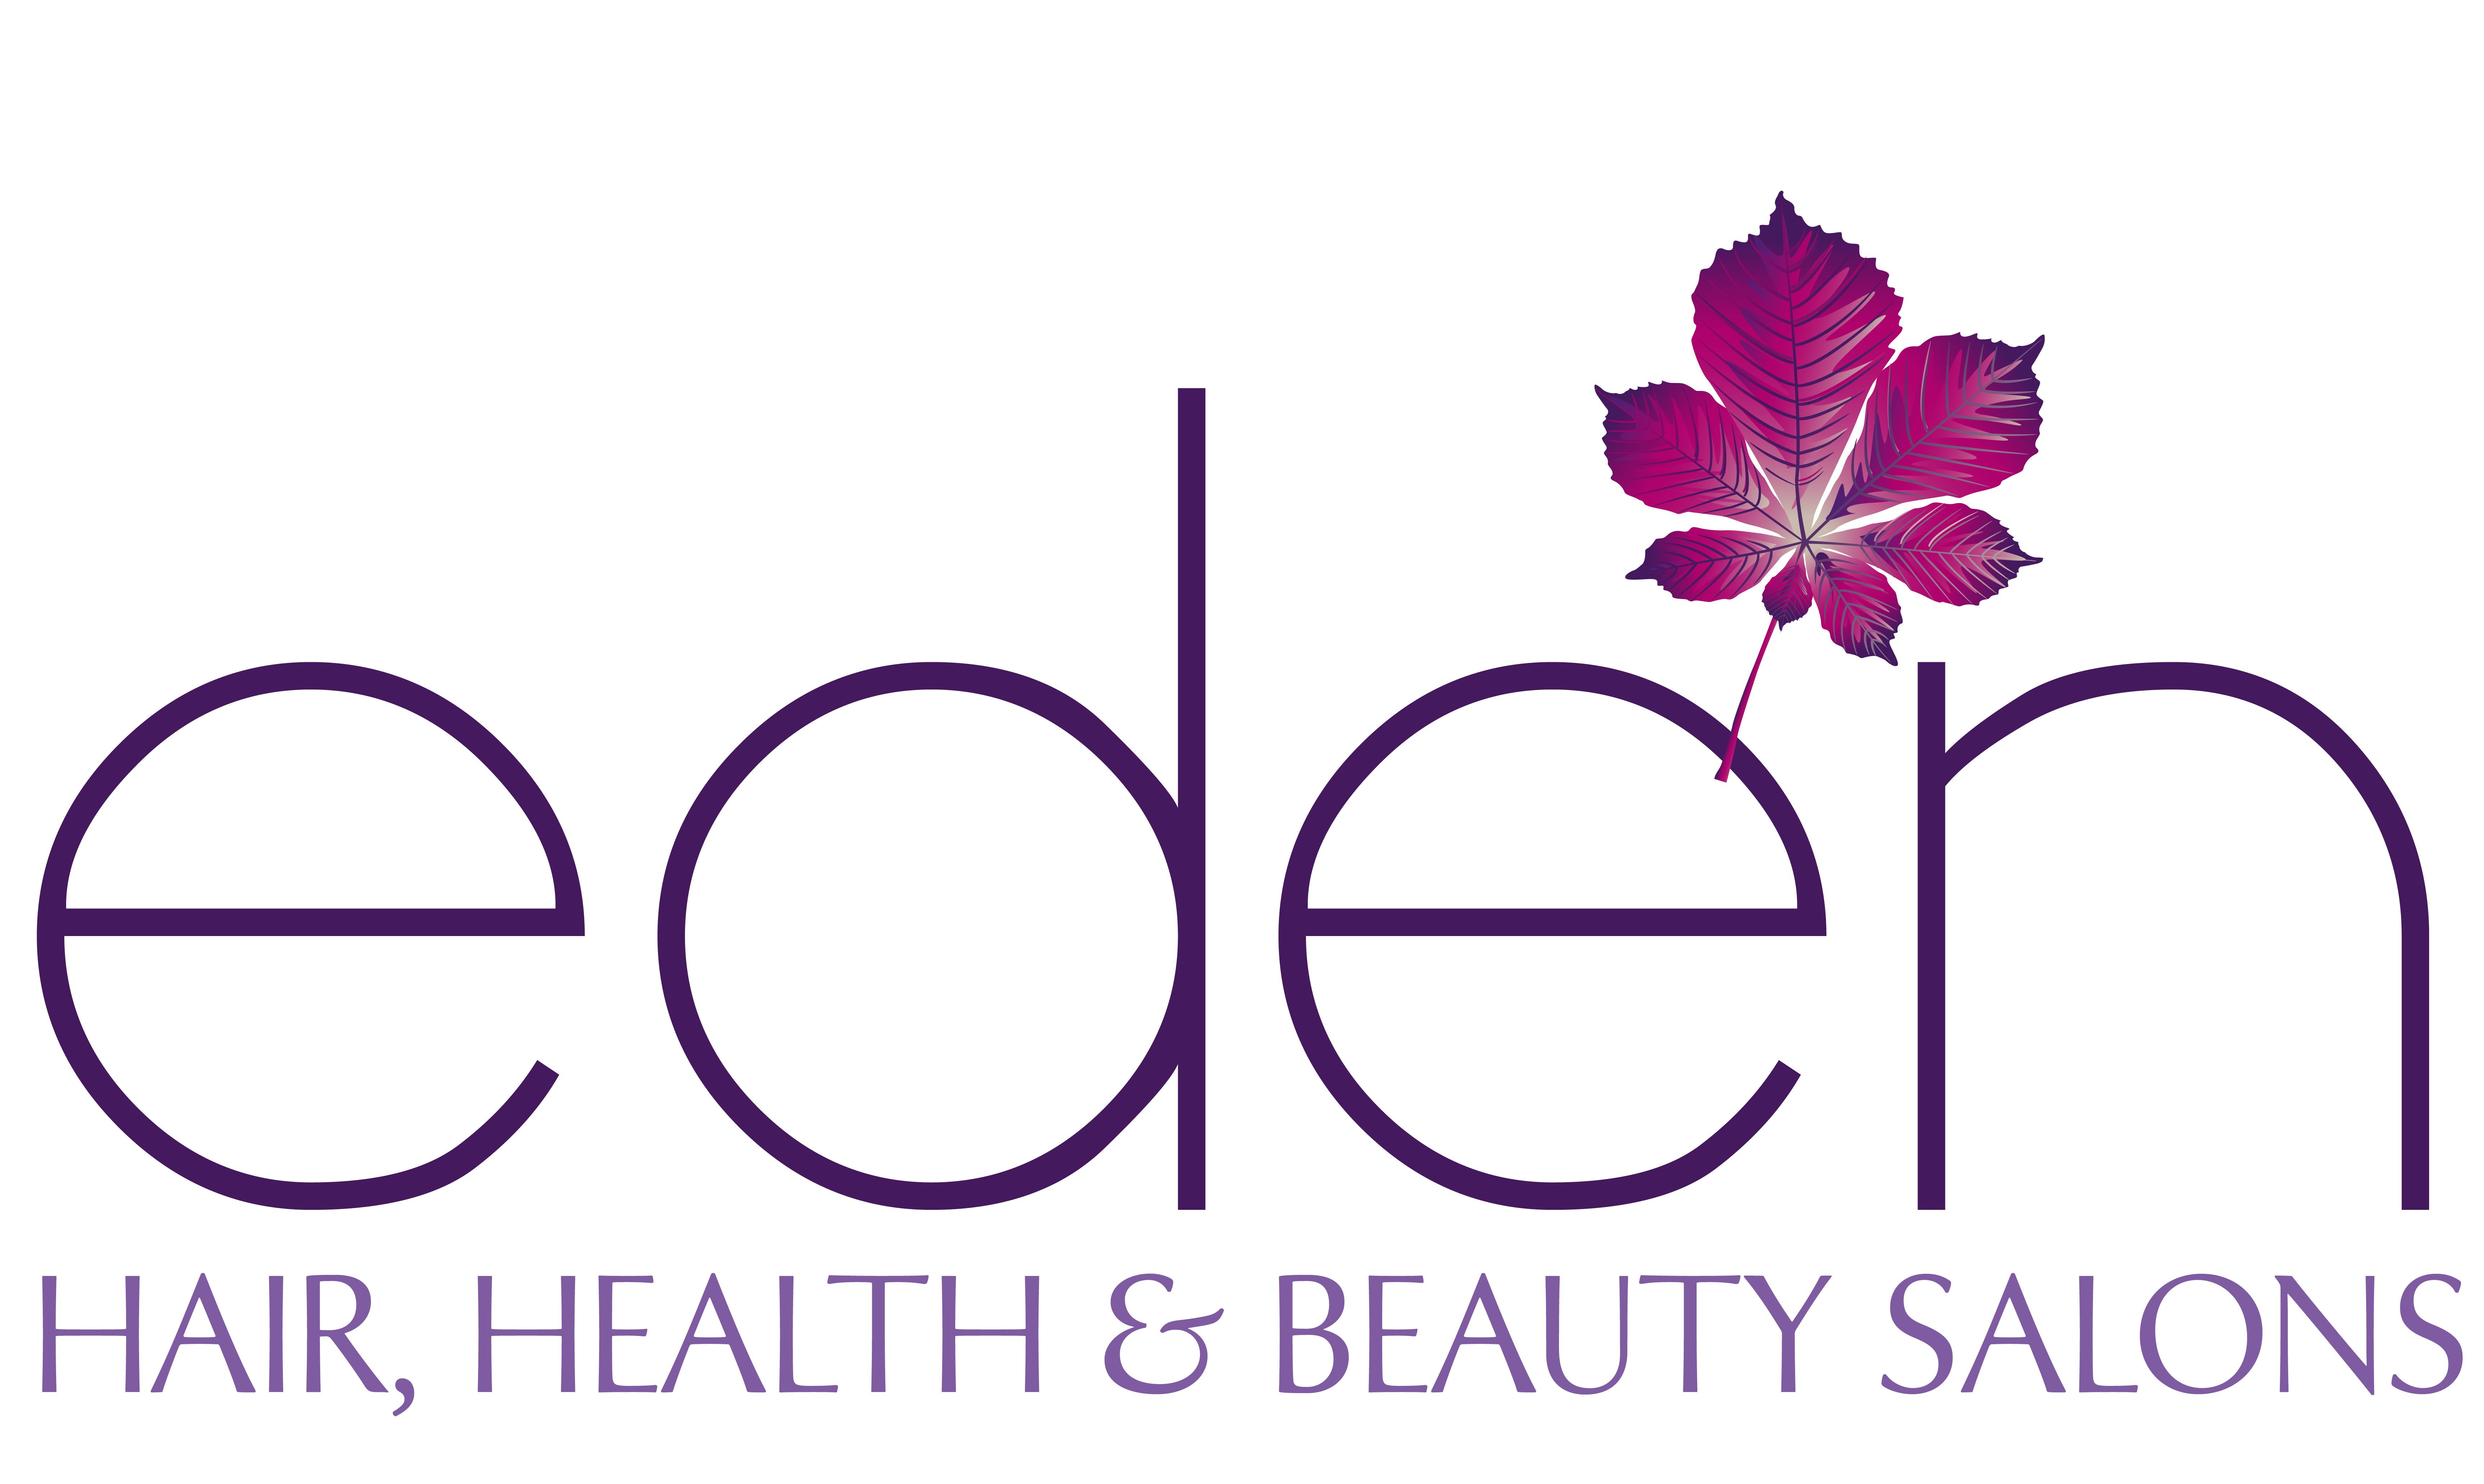 Eden Hair, Health and Beauty Salons Logo on a transparent background